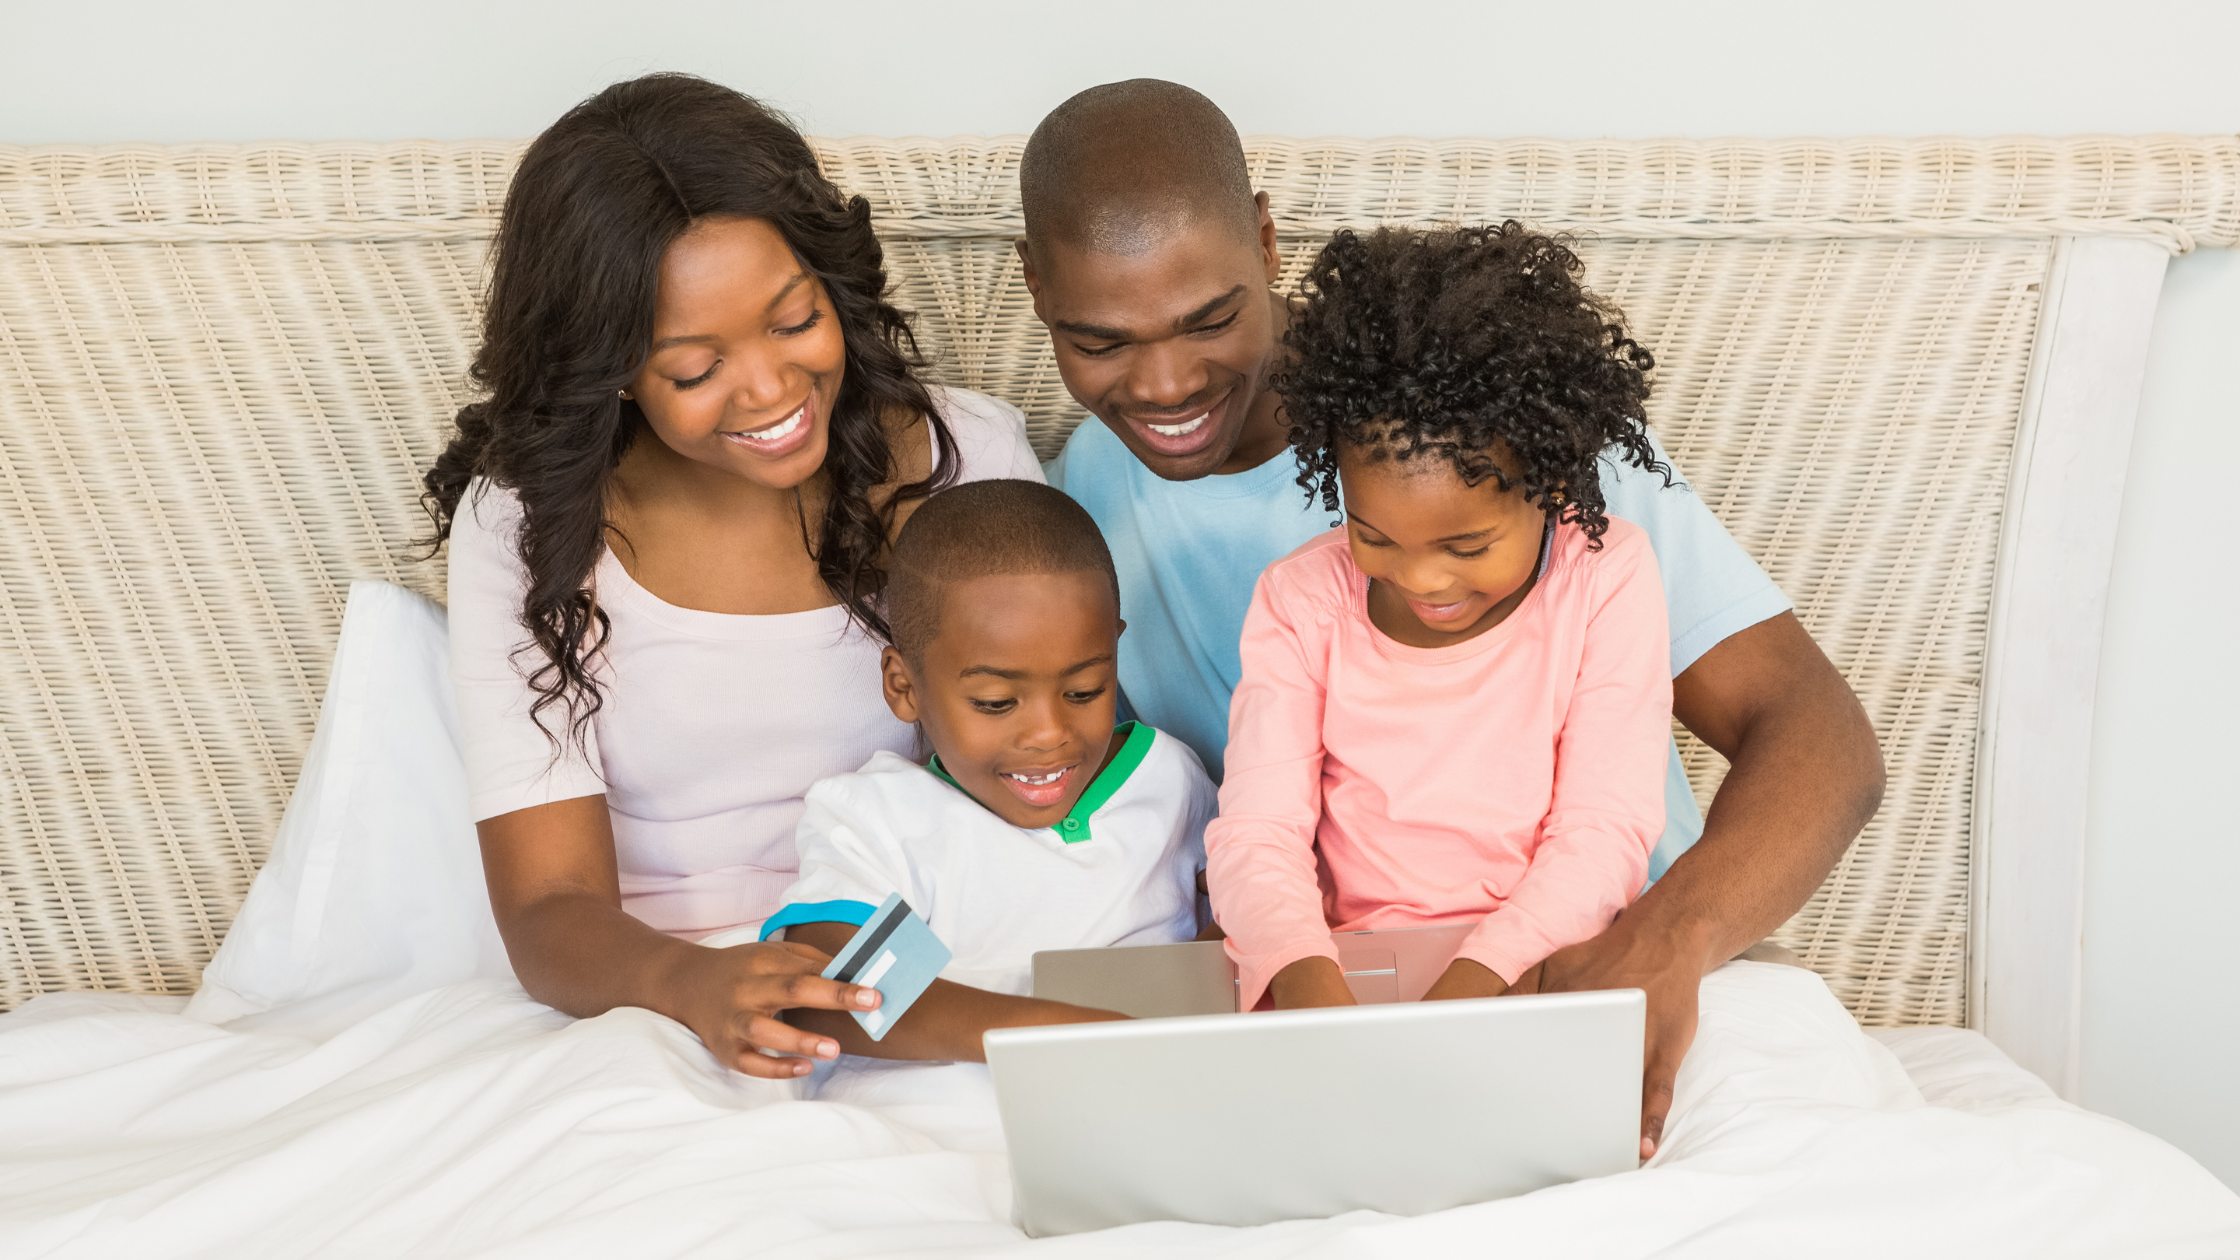 RAISING FINANCIALLY SAVVY KIDS: EMPOWERING THE NEXT GENERATION WITH FINANCIAL LITERACY